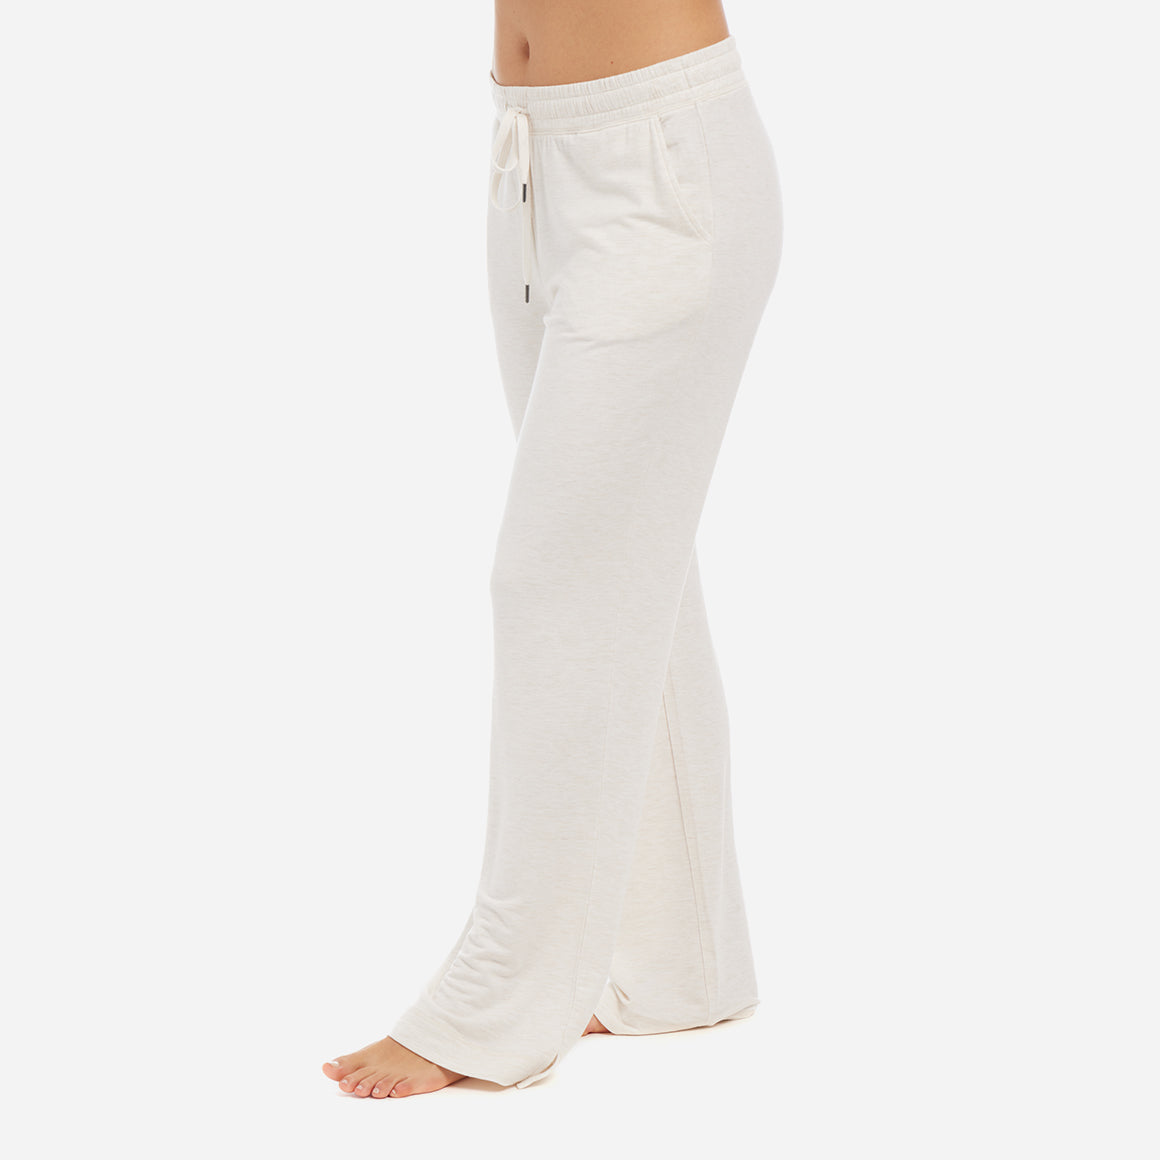 These cozy lounge pants feature convenient hip pockets, a relaxed fit, and an elastic waistband with an adjustable drawstring to provide a customized and secure fit.